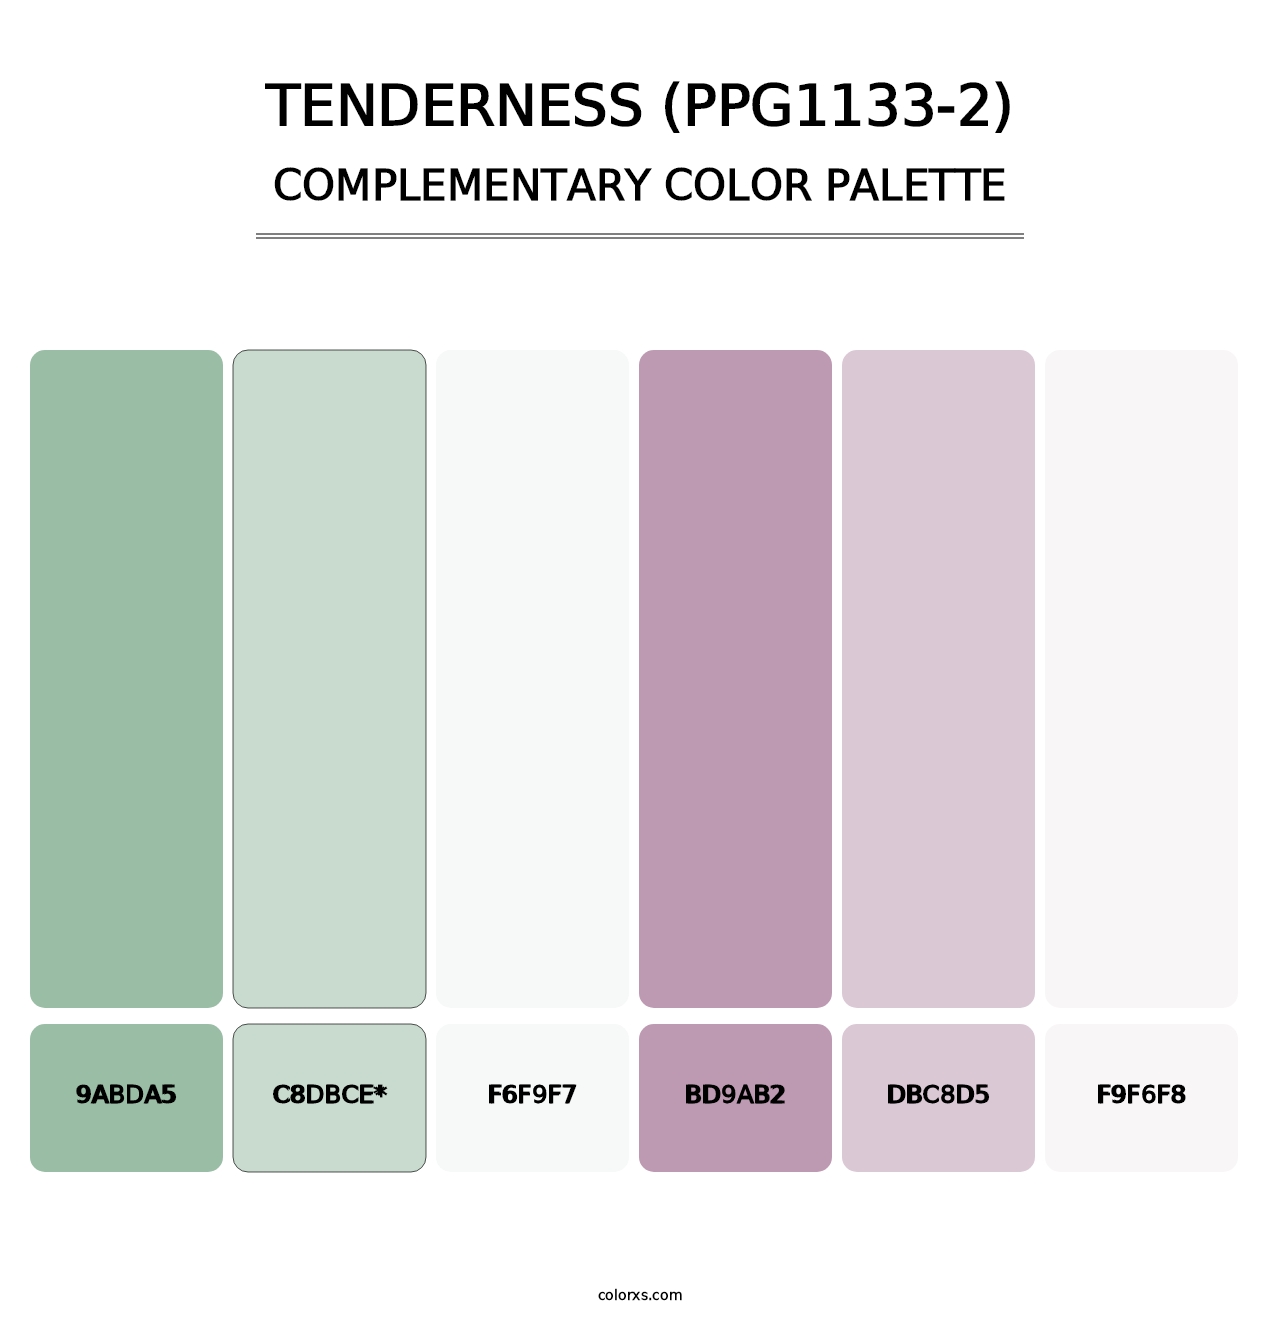 Tenderness (PPG1133-2) - Complementary Color Palette